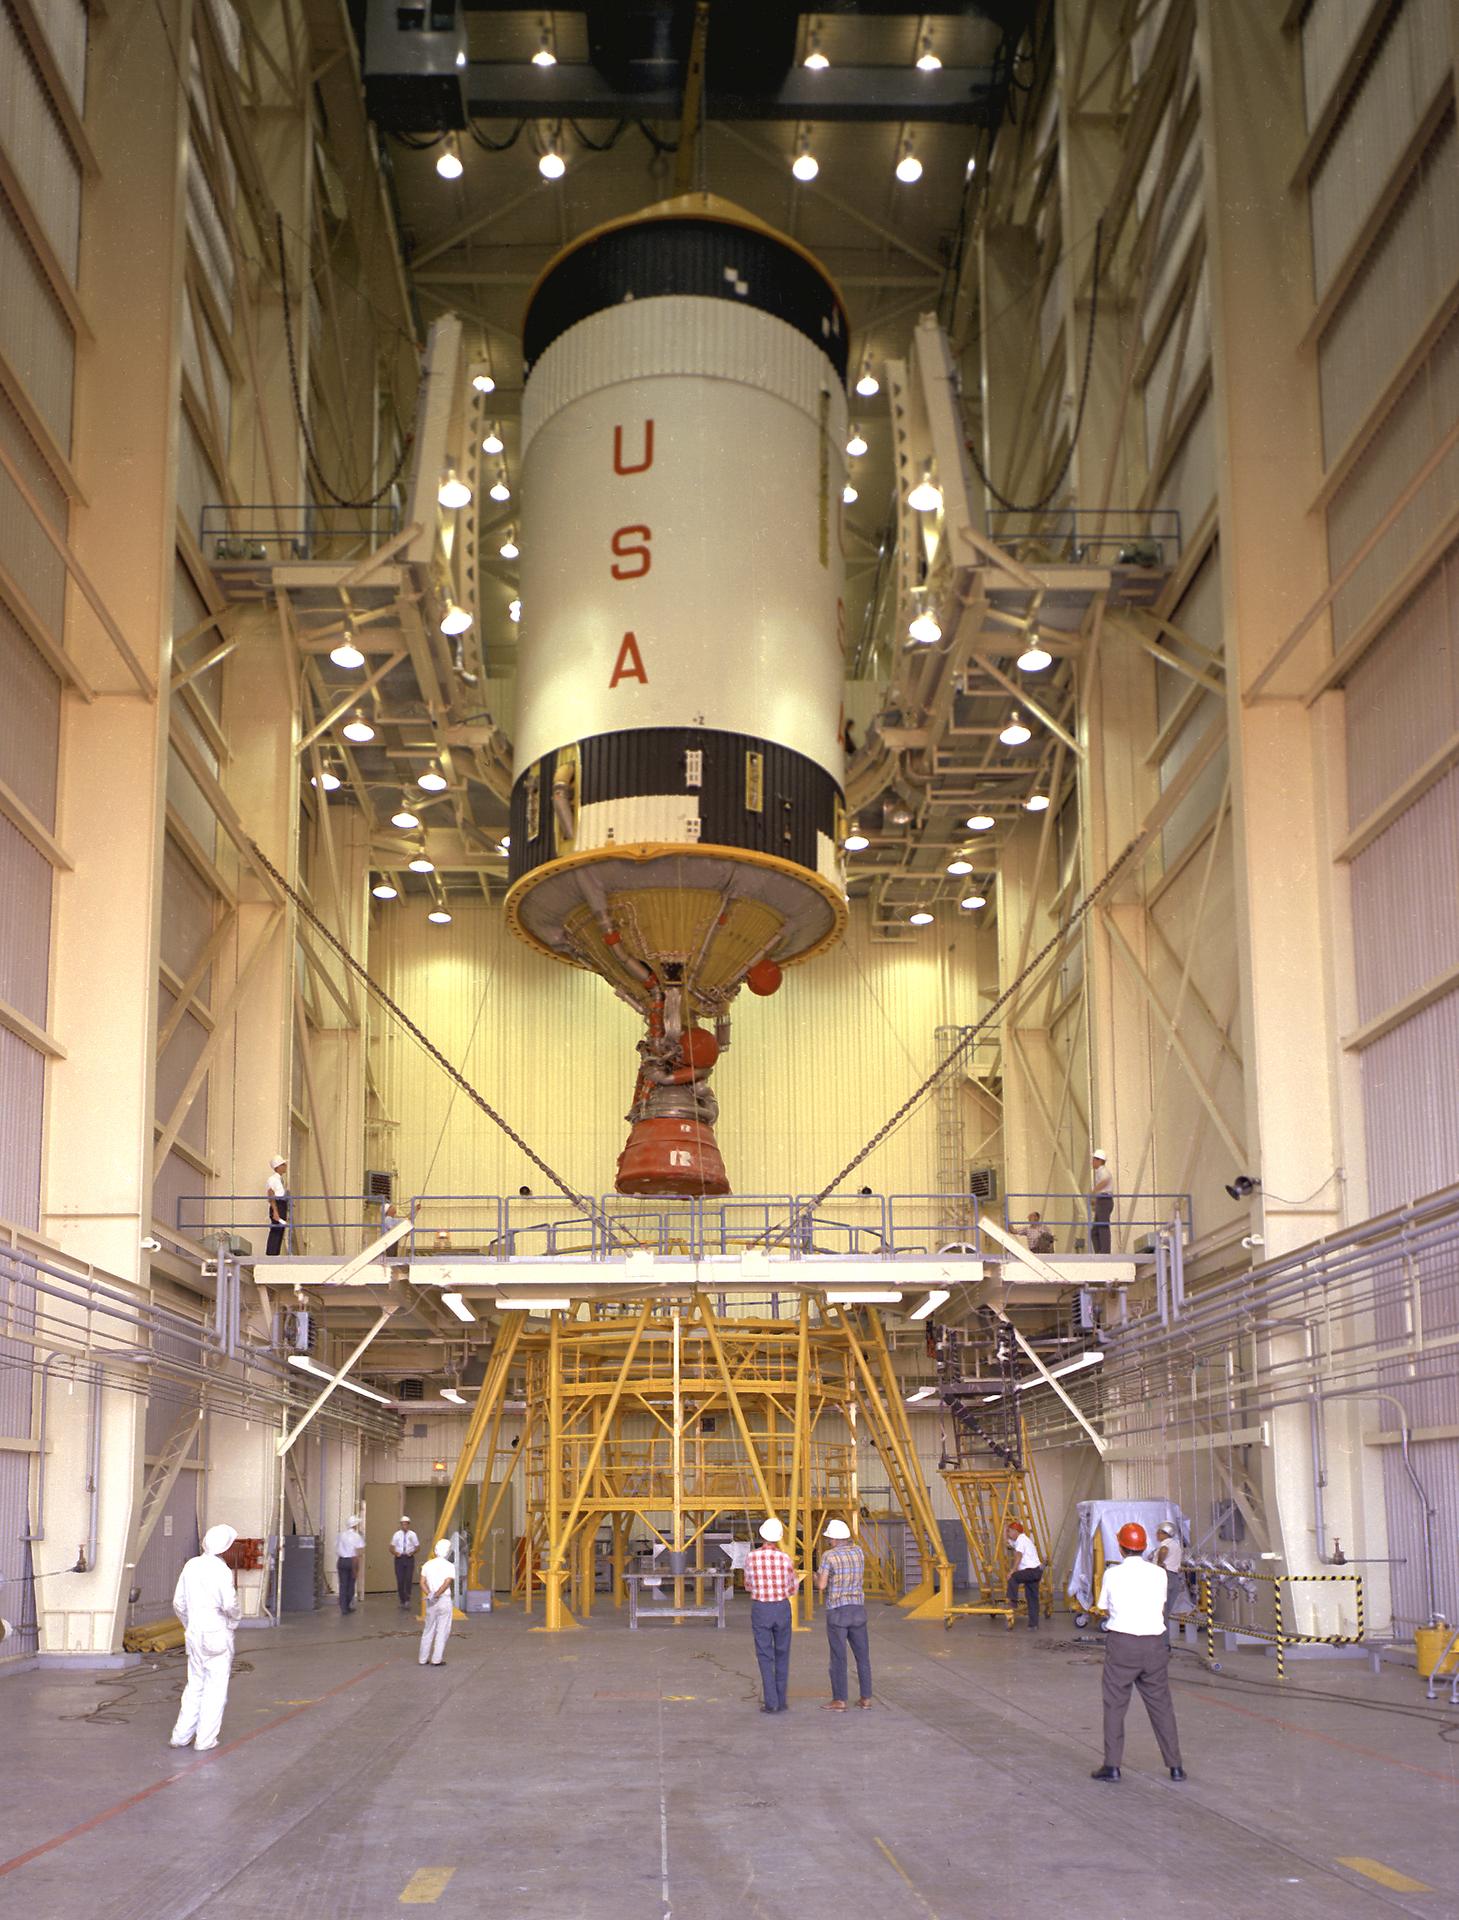 The interior of the Vertical Checkout Lab with an S-IVB. (Source: NASA)